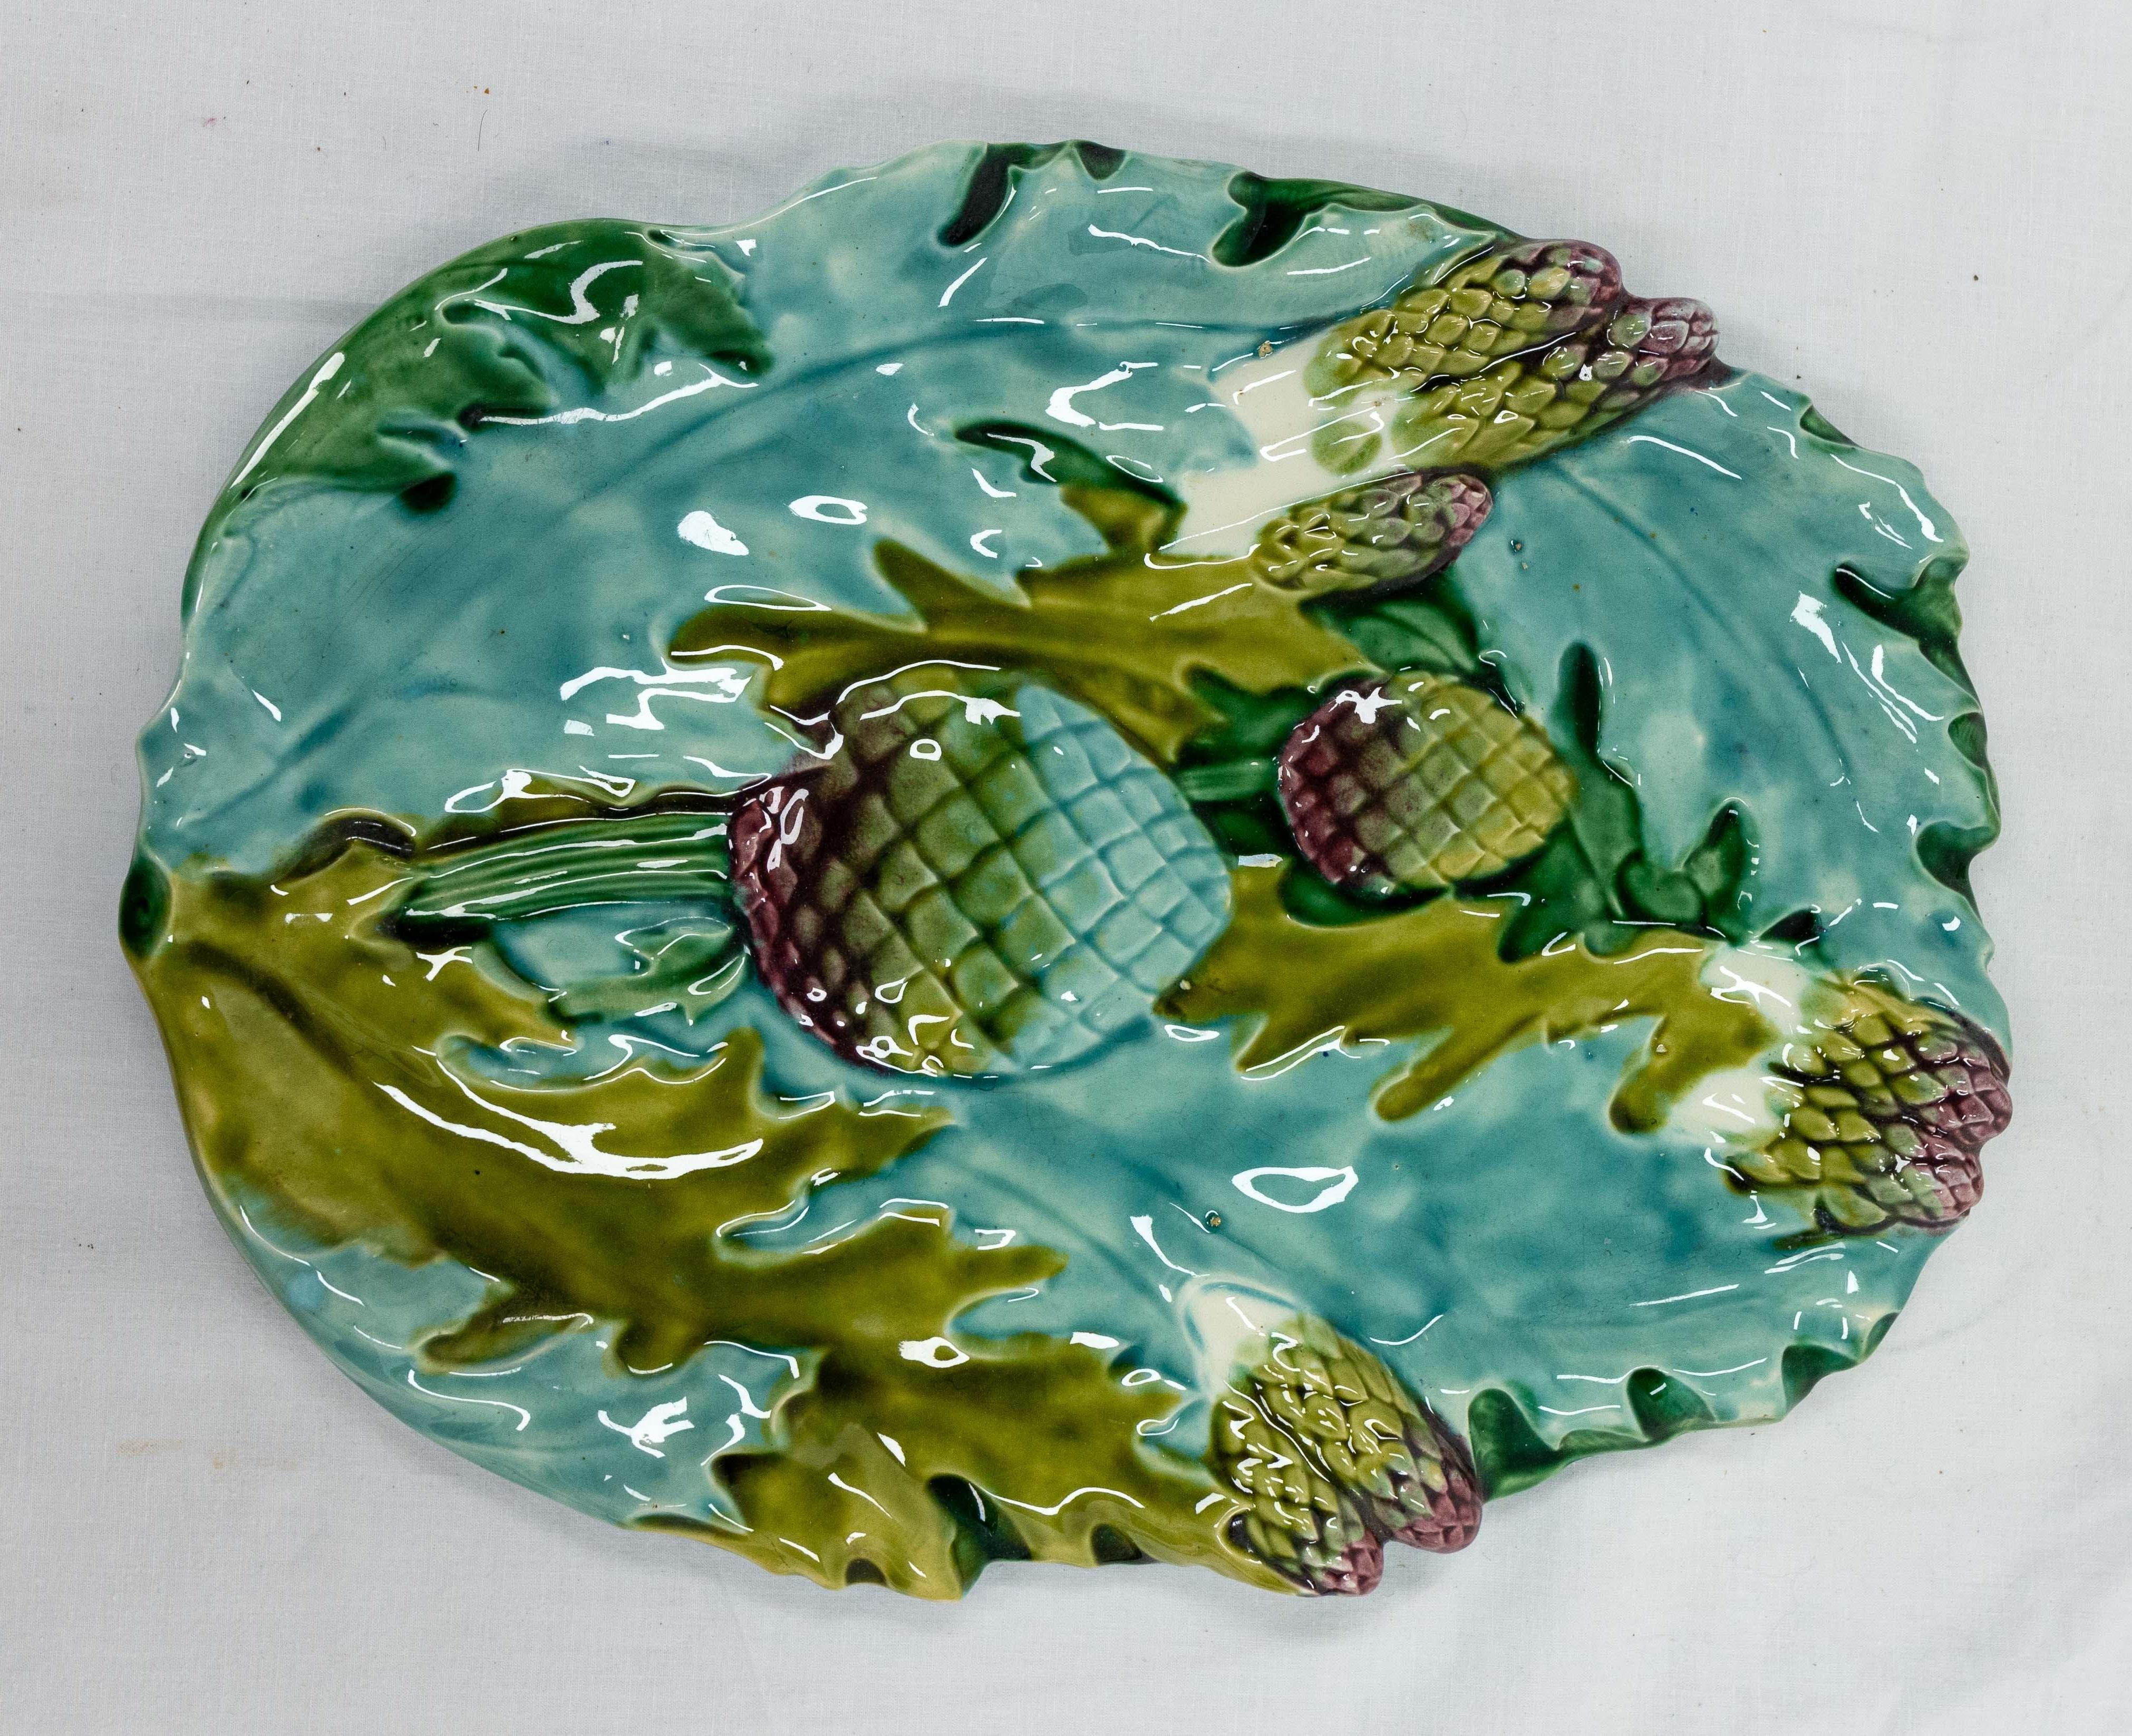 Barbotine dish for vegetables: asparagus or artichokes as it is represented or for any other vegetables or use
French art nouveau, circa 1900
Manufacture in Luneville, France
Good condition.

Shipping:
L36 P27 H4,5 1,5 KG.